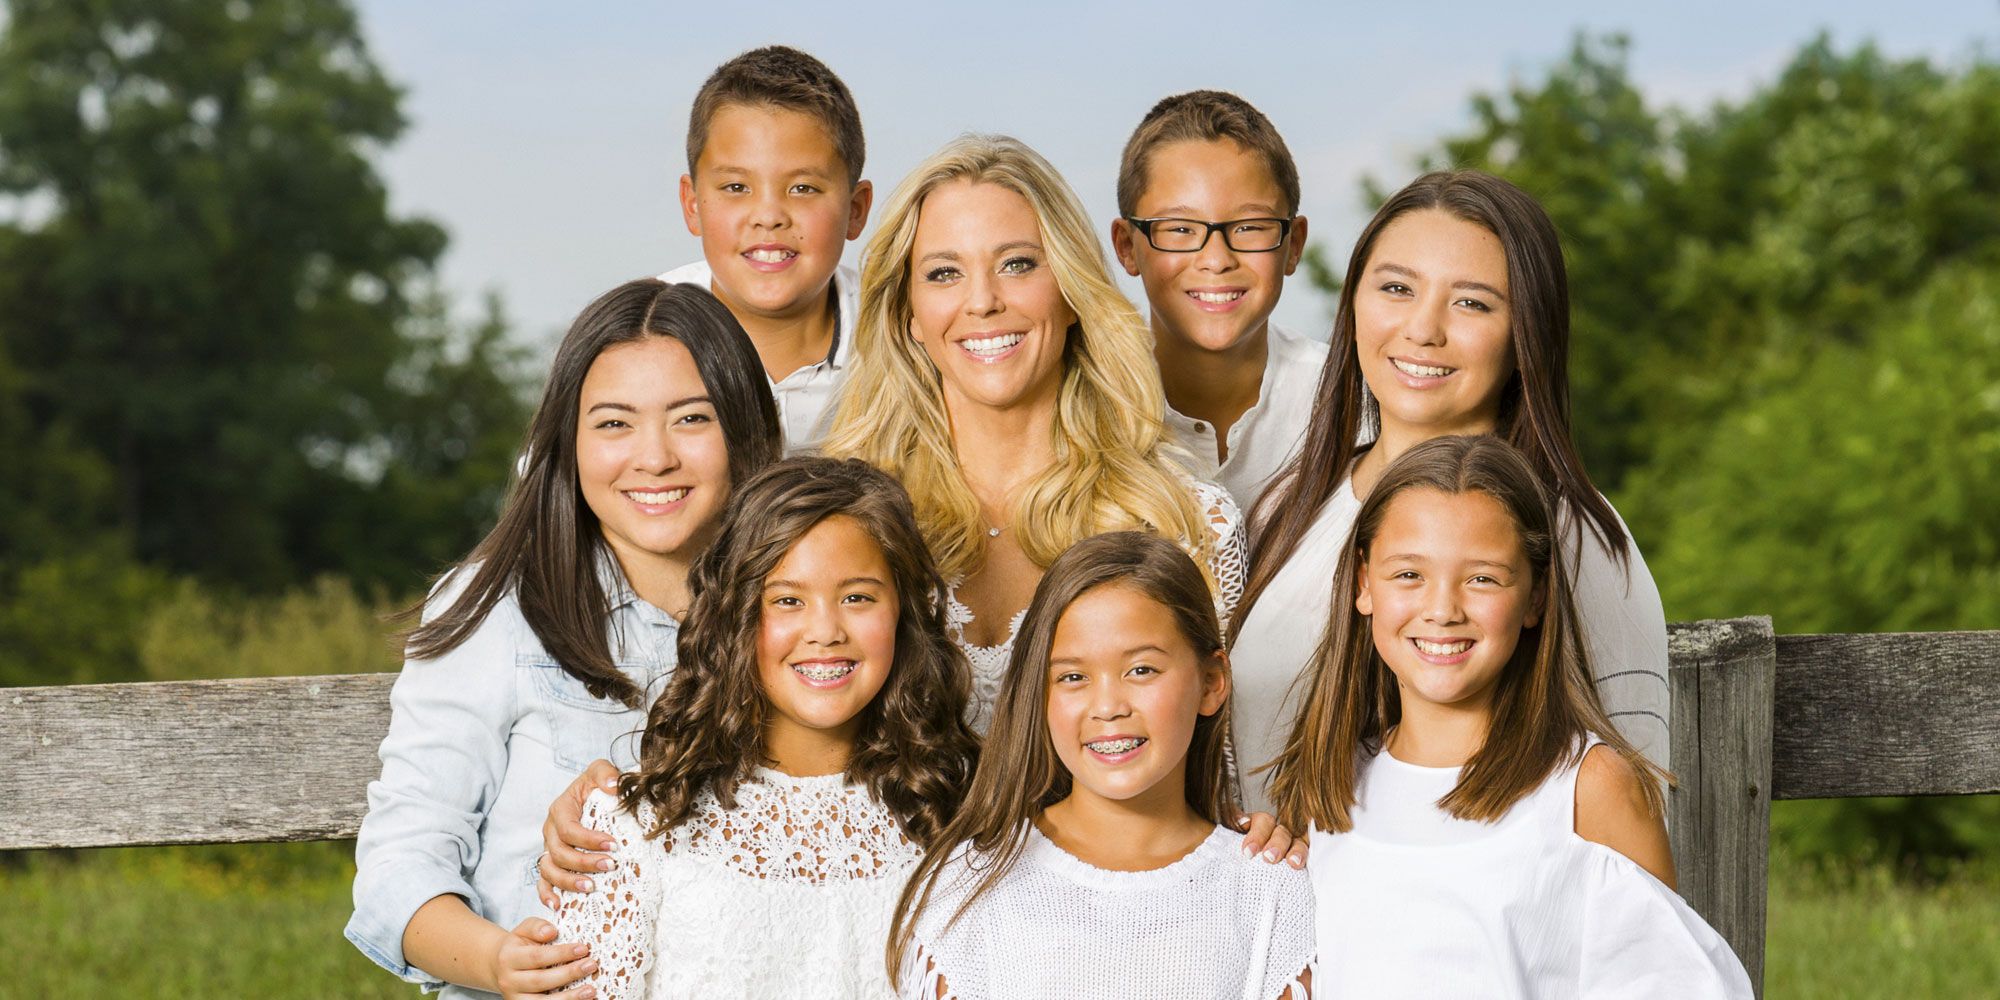 Kate Gosselin's in Legal Trouble for Filming with Kids